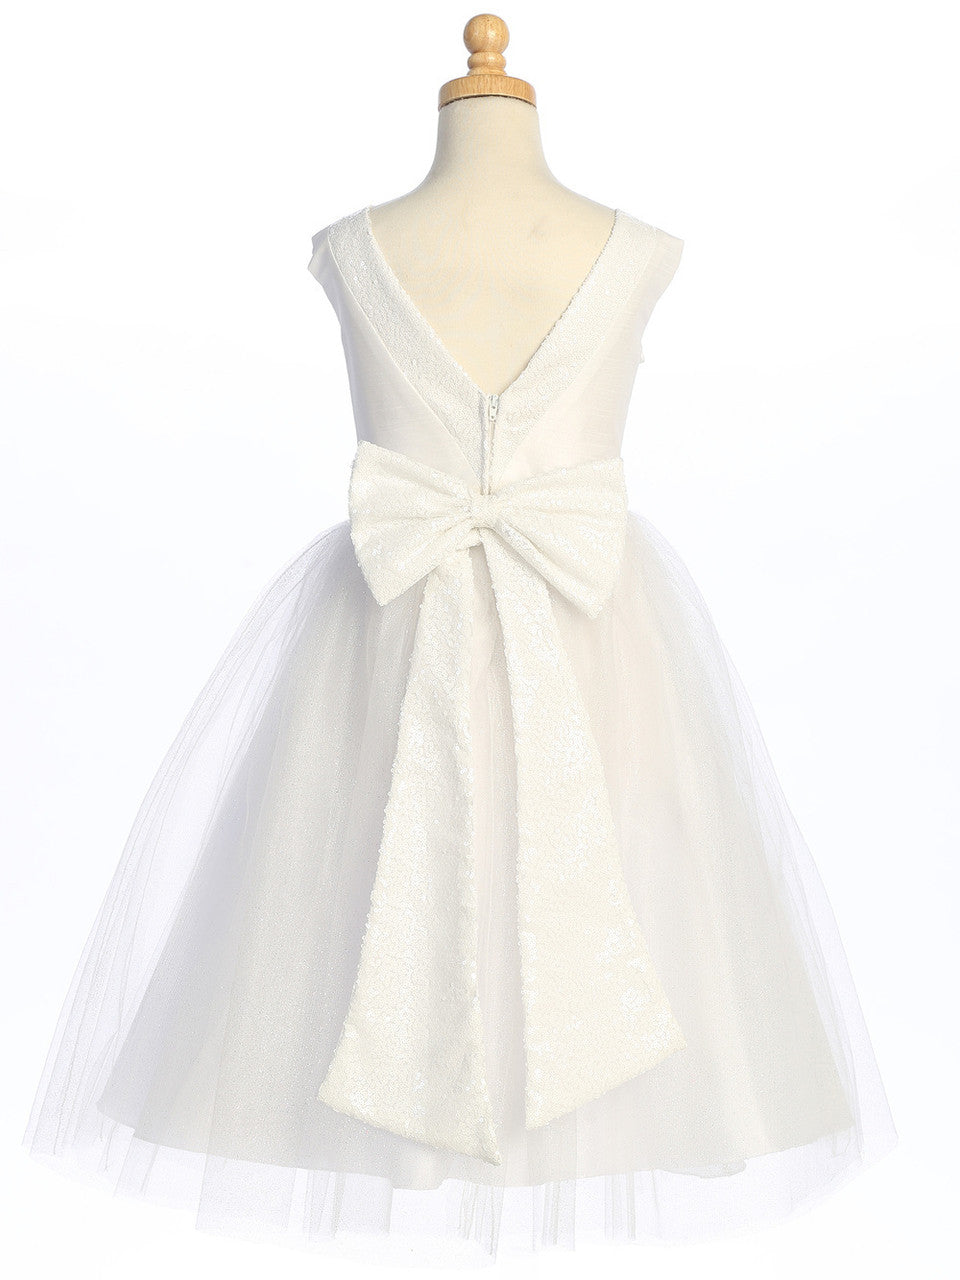 White Shantung and Sparkle Tulle Dress with Sequin Sash - BL255-WHT